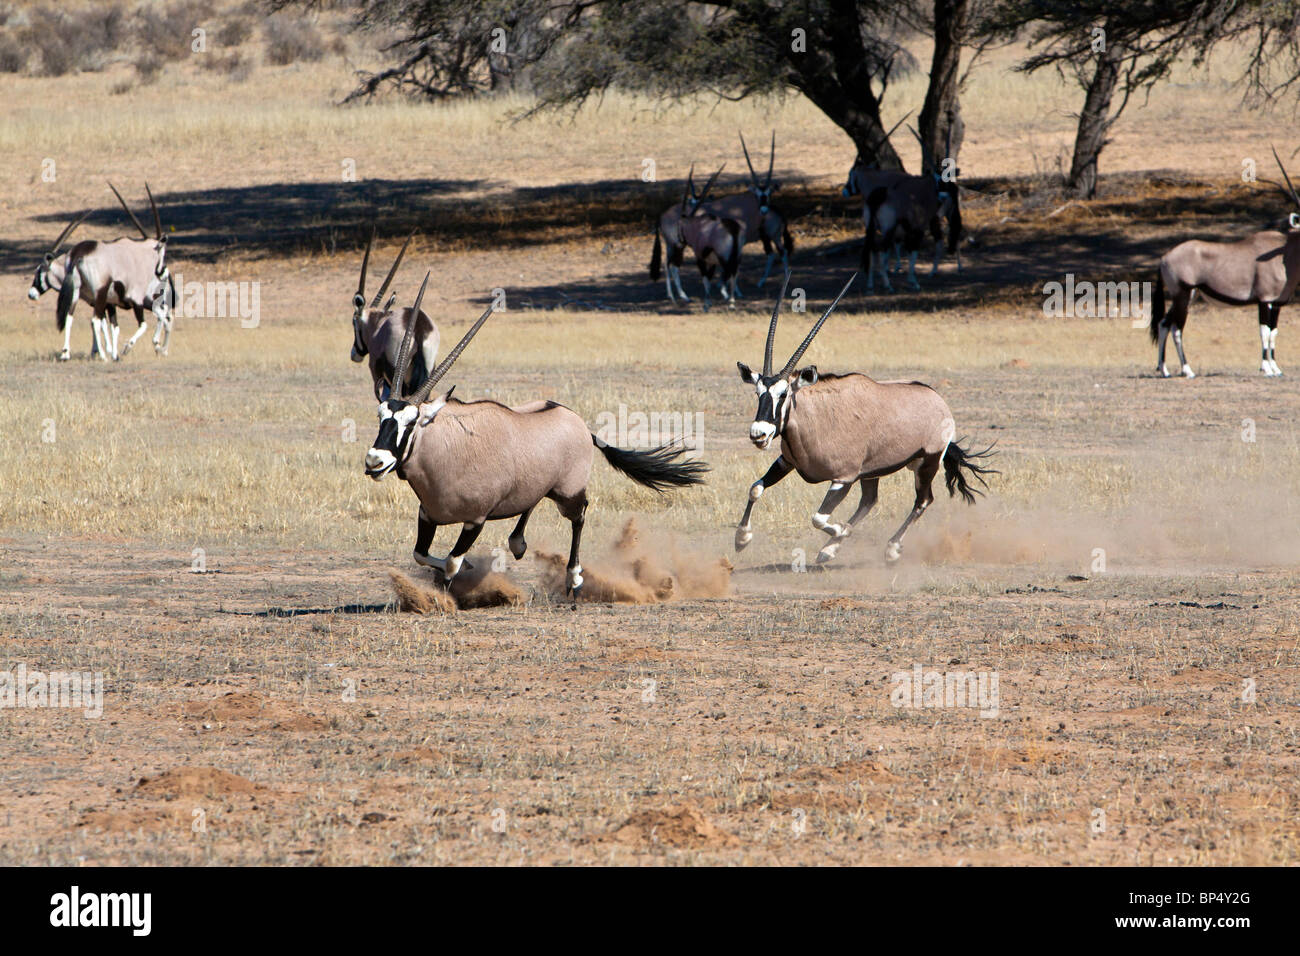 Oryx skirmishing in the Kgalagadi Transfrontier National Park in South Africa and Botswana Stock Photo